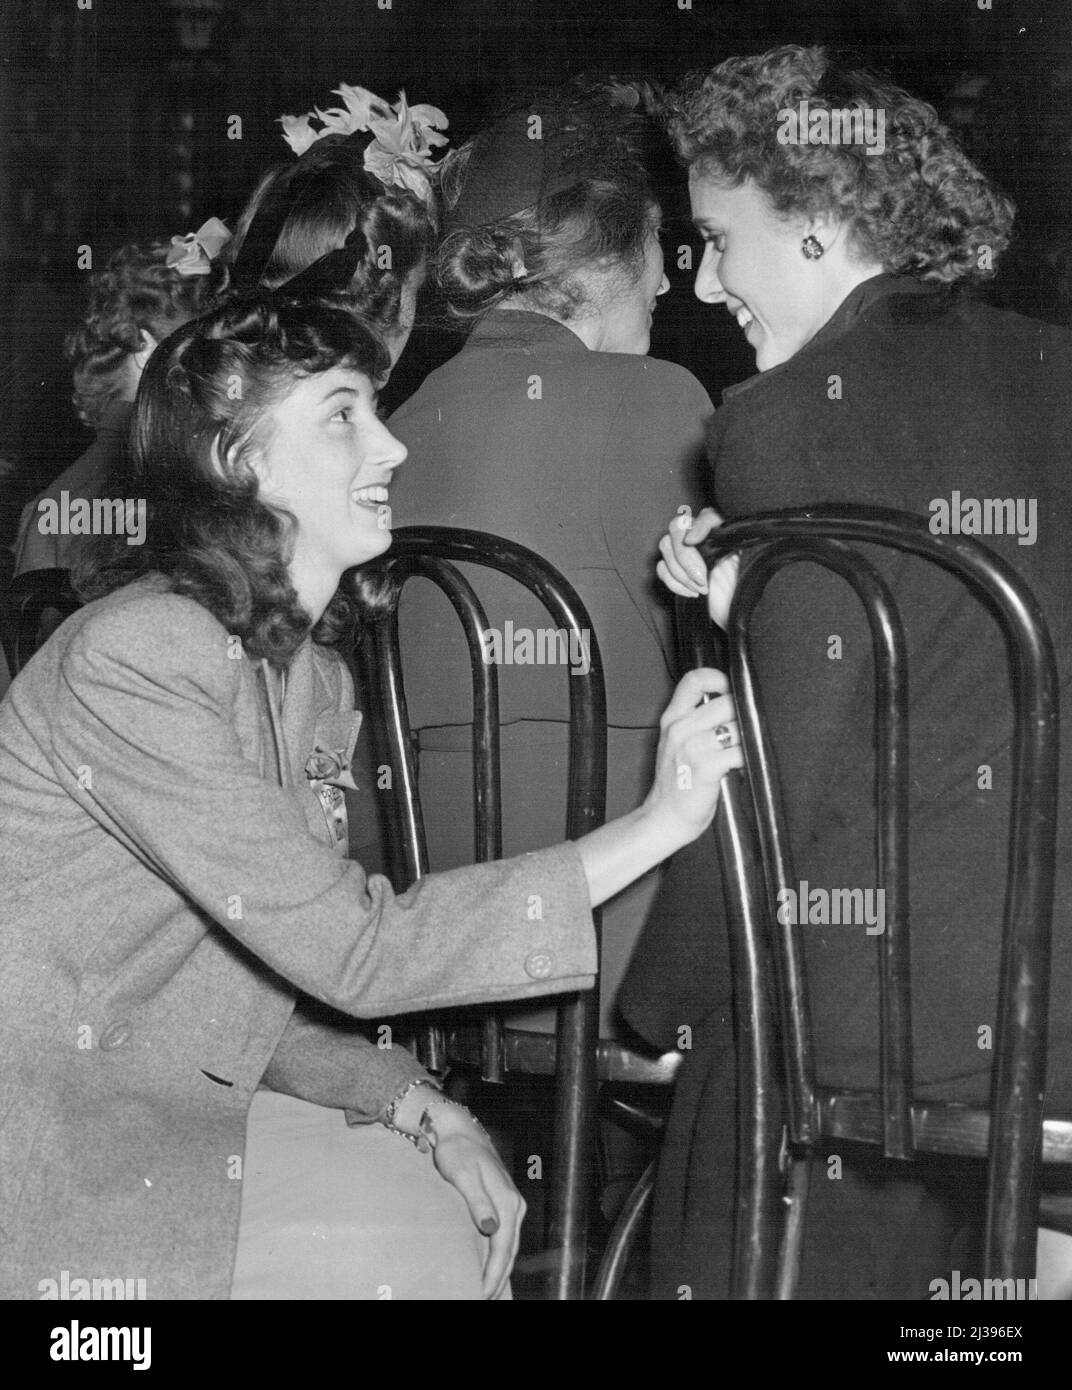 Career Woman (Tenth Of Twelve) -- Sorrow came to replace this kind of light-hearted pleasantry between Clare Boothe Luce and her daughter, Ann Brokaw (left), shown just before Mrs. Luce delivered the keynote address at the Republican State Convention in Hartford, Conn., 1942. The young girl was killed at the age of 19 in an auto collision in 1944. With her daughter, April, in 1942.The couple were mutually devoted. But April was killed in a car smash. February 20, 1953. (Photo by United Press). Stock Photo